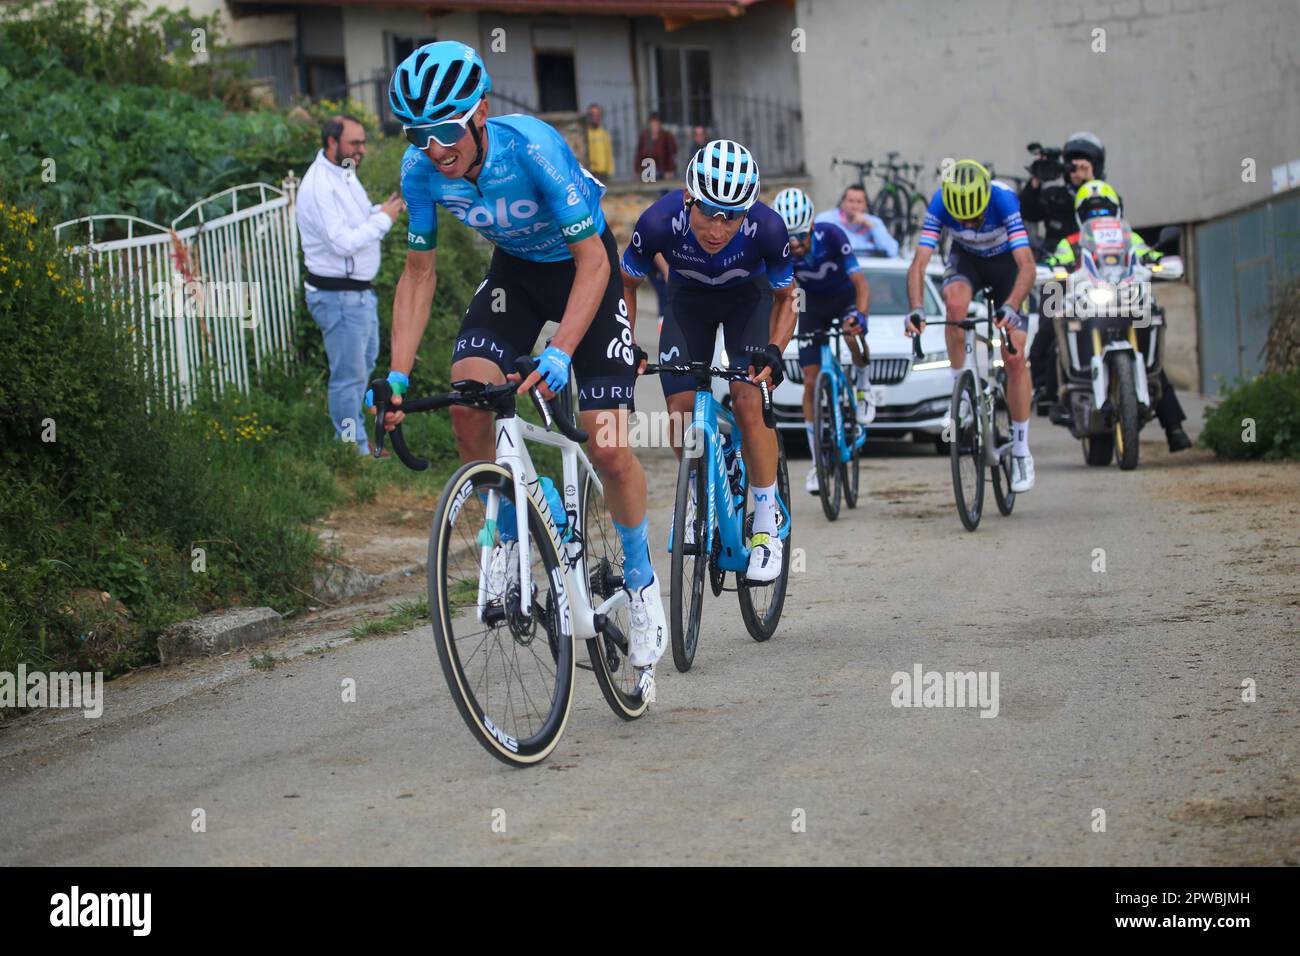 Las Tiendas, Spain, 29th April, 2023: The main group led by Lorenzo Fortunato (EOLO-Kometa, L) together with Einer Augusto Rubio (Movistar Team, 2L) during the 2nd stage of the Vuelta a Asturias 2023 between Candas and Cangas del Narcea, on April 29, 2023, in Las Tiendas, Spain. Credit: Alberto Brevers / Alamy Live News Stock Photo